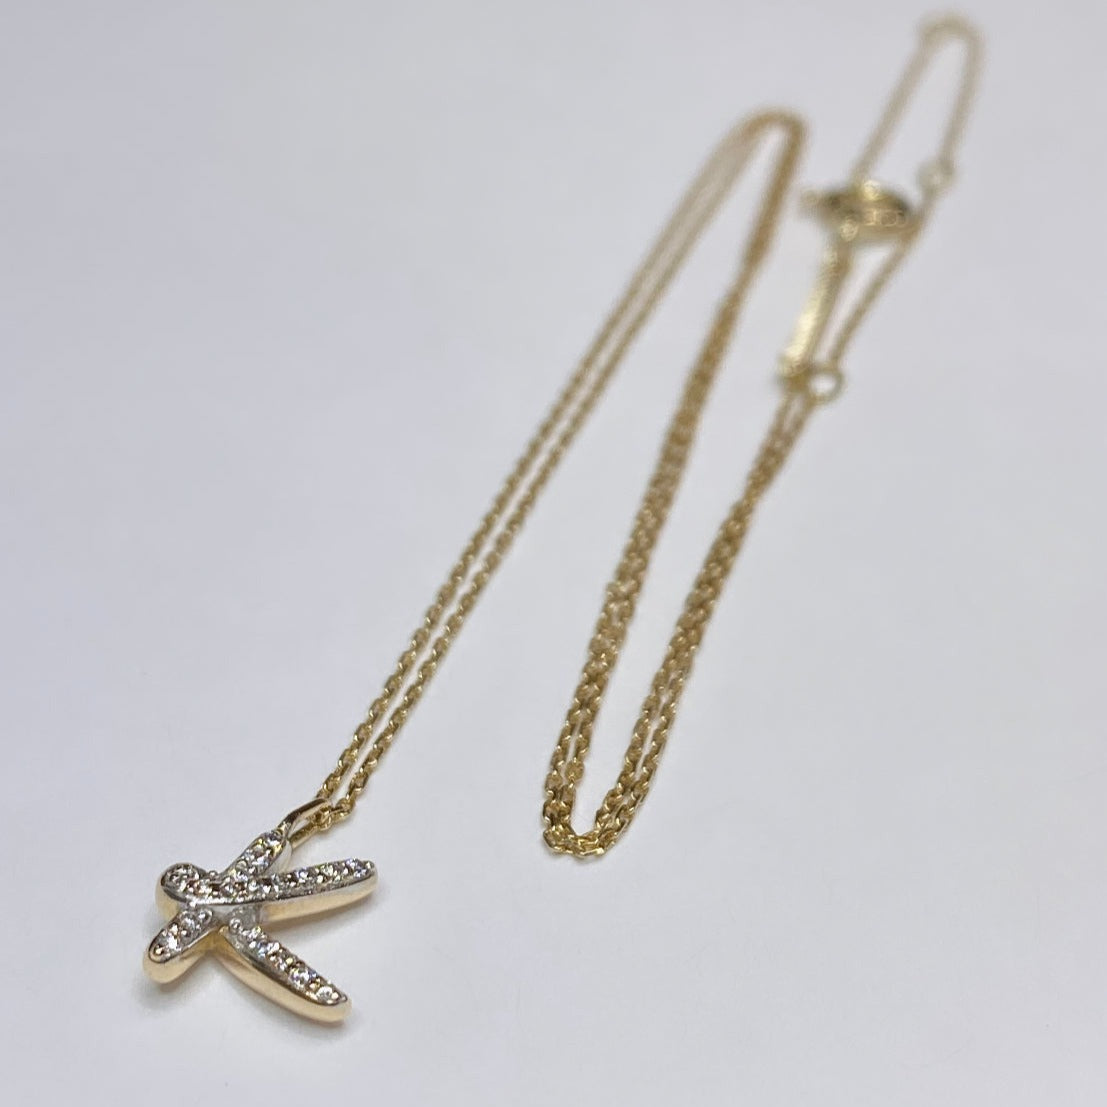 Kendra Scott : Cailin Gold Crystal Strand Necklace in White Crystal -  Annies Hallmark and Gretchens Hallmark $85.00